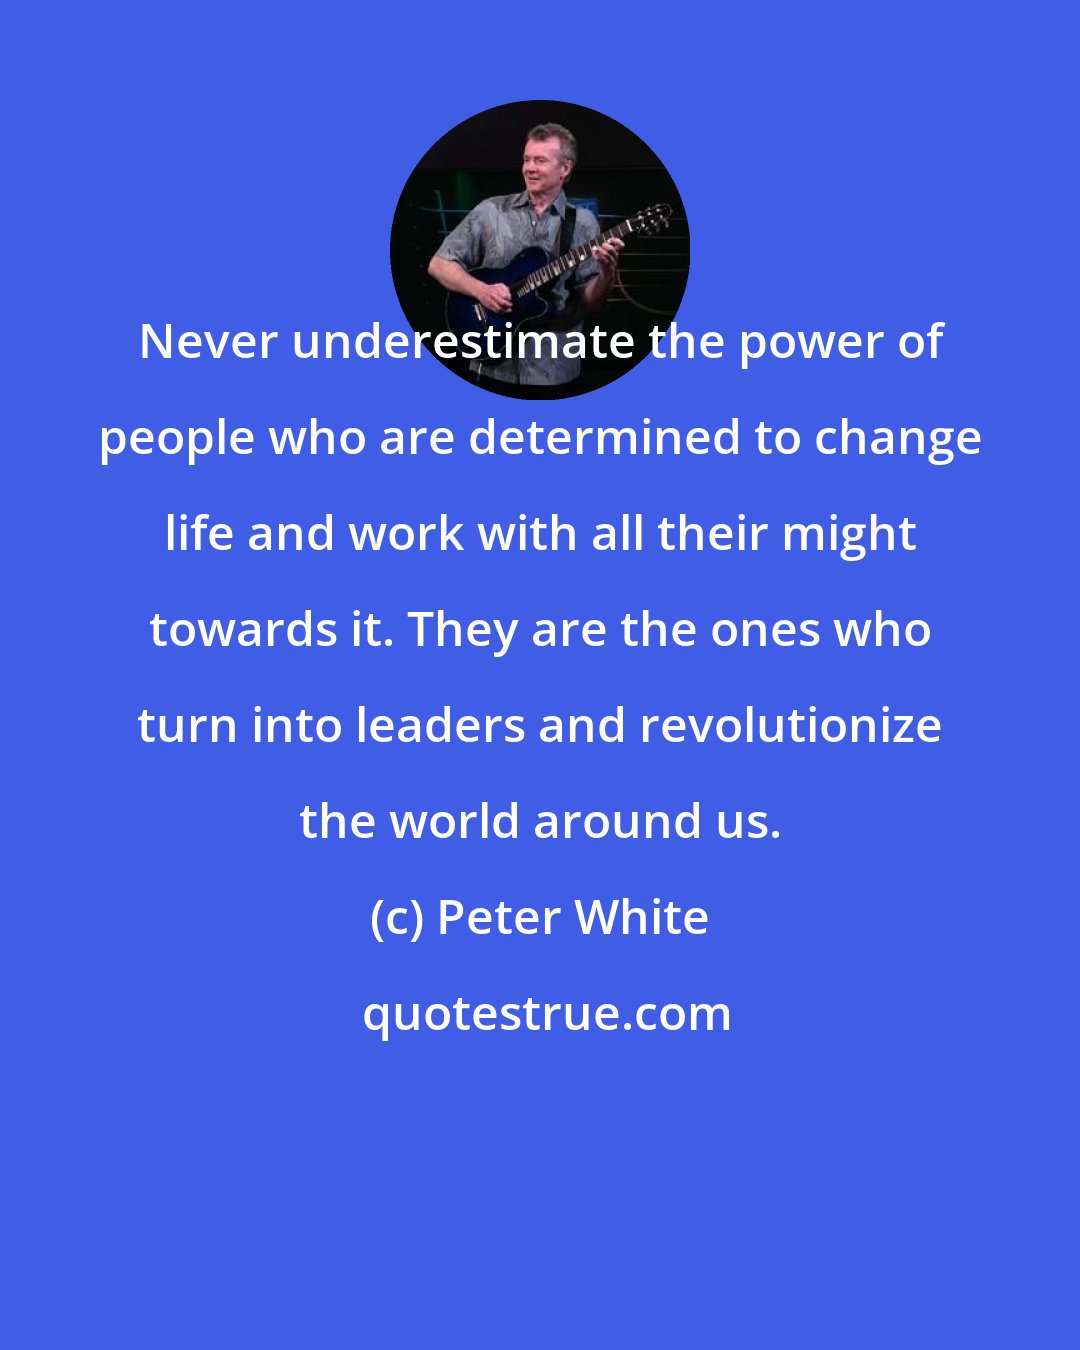 Peter White: Never underestimate the power of people who are determined to change life and work with all their might towards it. They are the ones who turn into leaders and revolutionize the world around us.